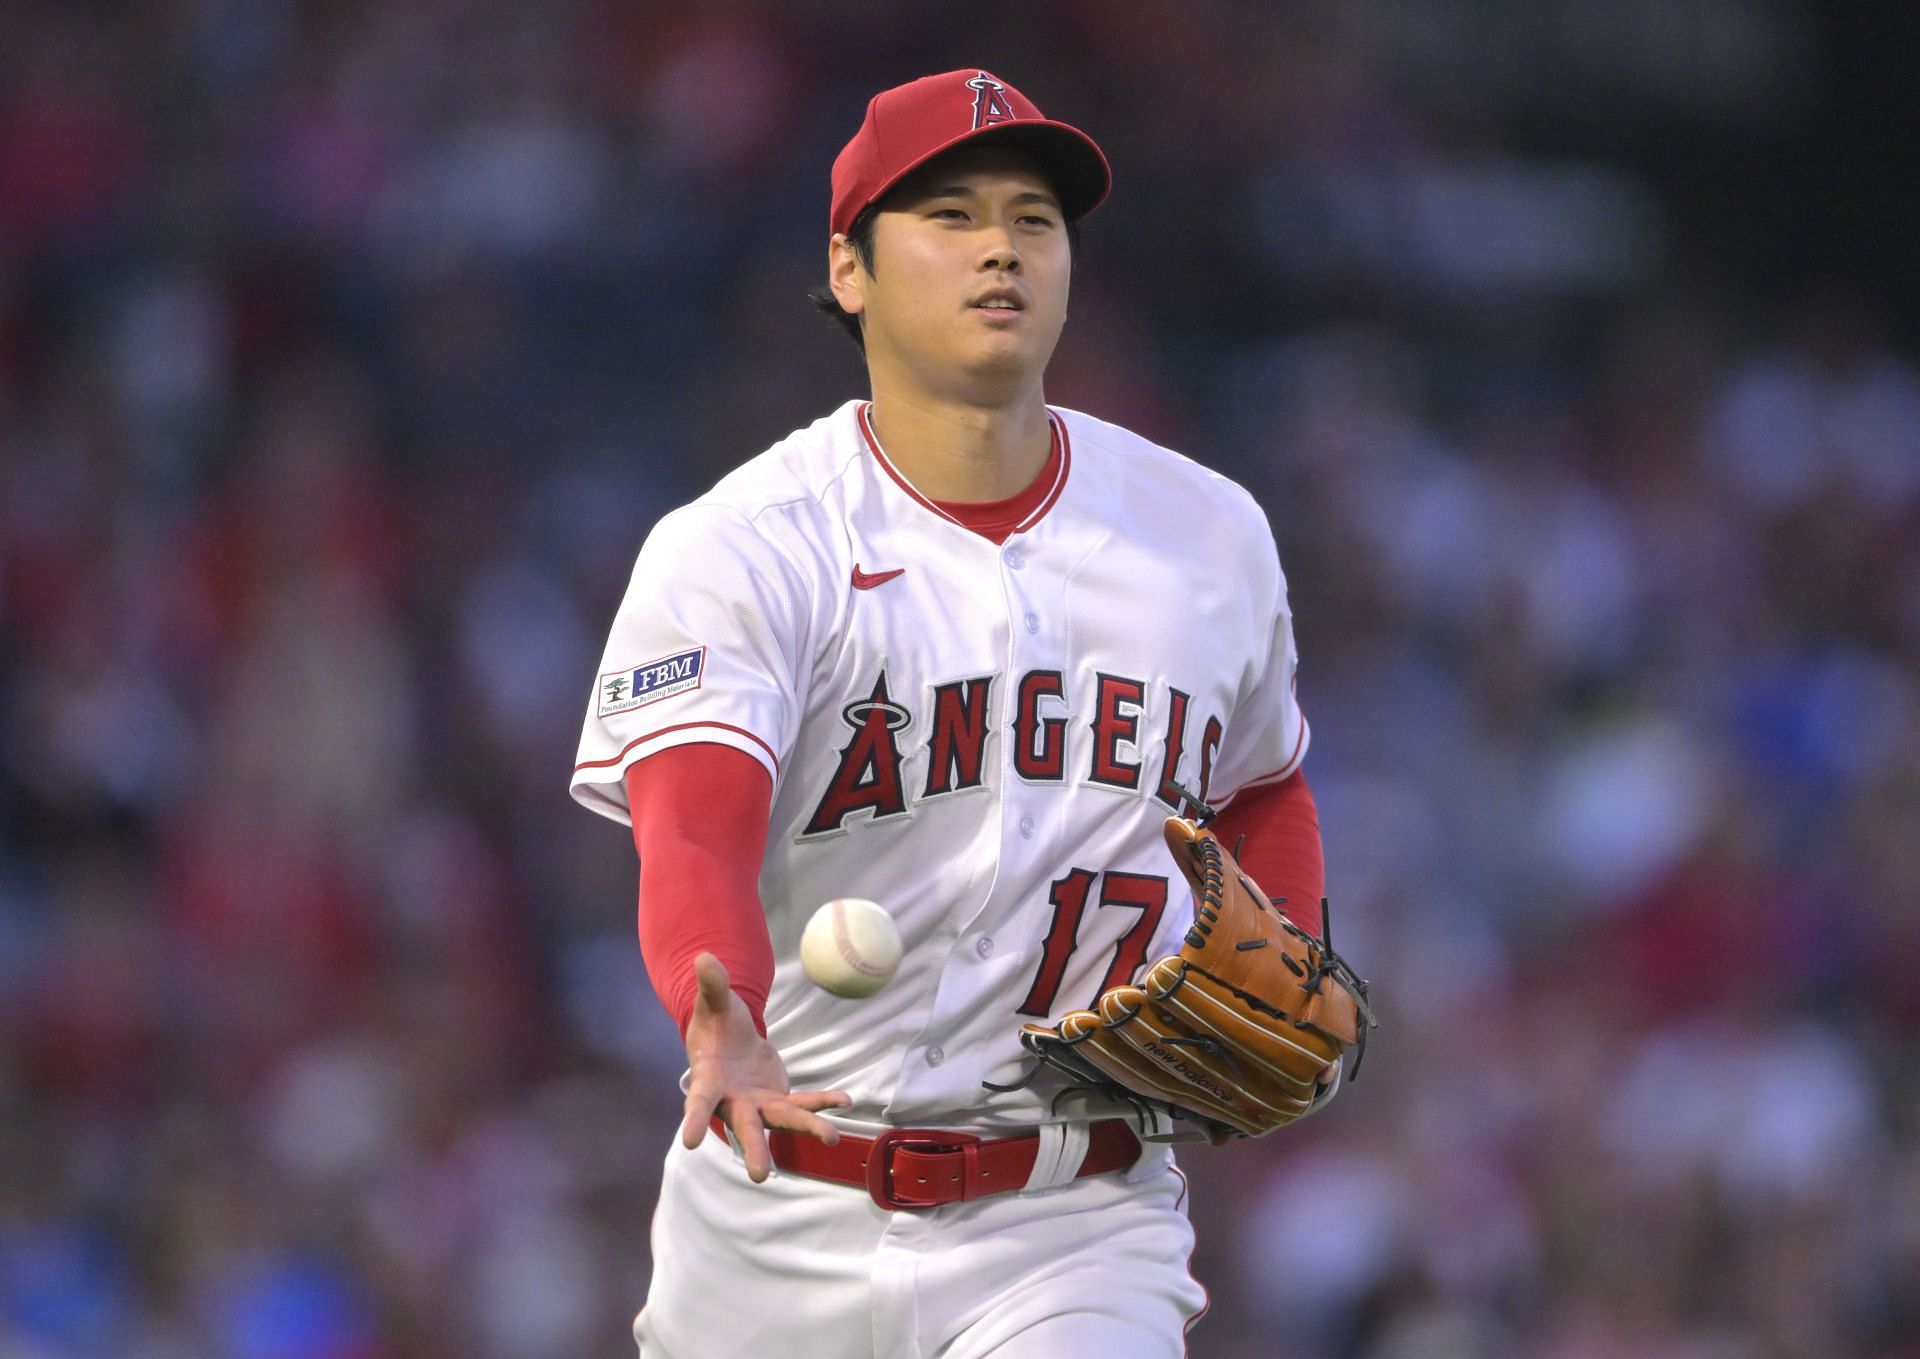 Shohei Ohtani of the Los Angeles Angels throws to first base in the third inning at Angel Stadium of Anaheim